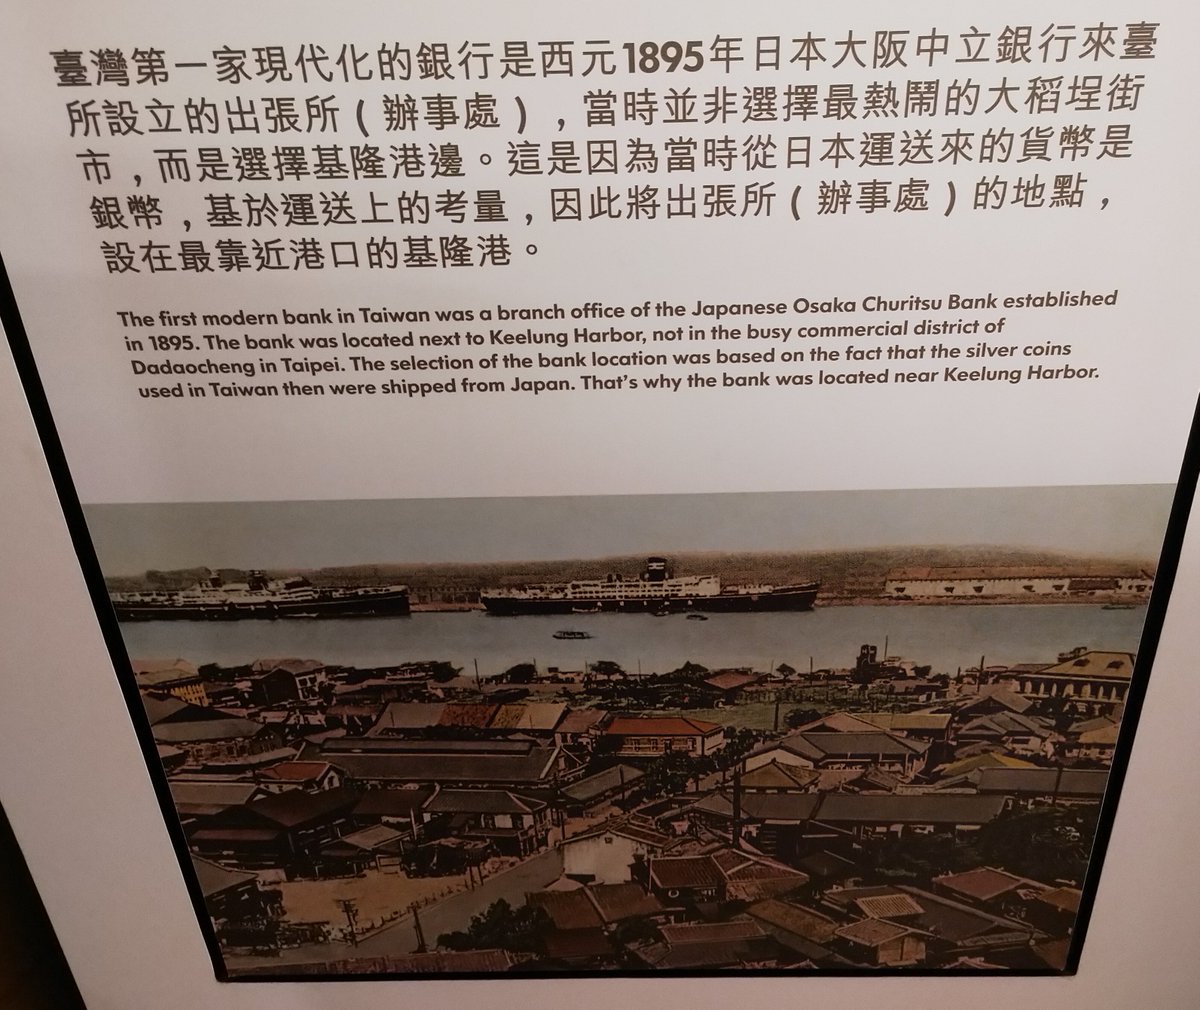 Merchant houses were replaced by banks upon the start of the colonial era. The first modern  #bank in  #Taiwan was a branch of the Japanese Osaka Churitsu Bank (大阪中立銀行), which was established in 1895 next to  #Keelung Harbor to receive shipments of silver coins from Japan.